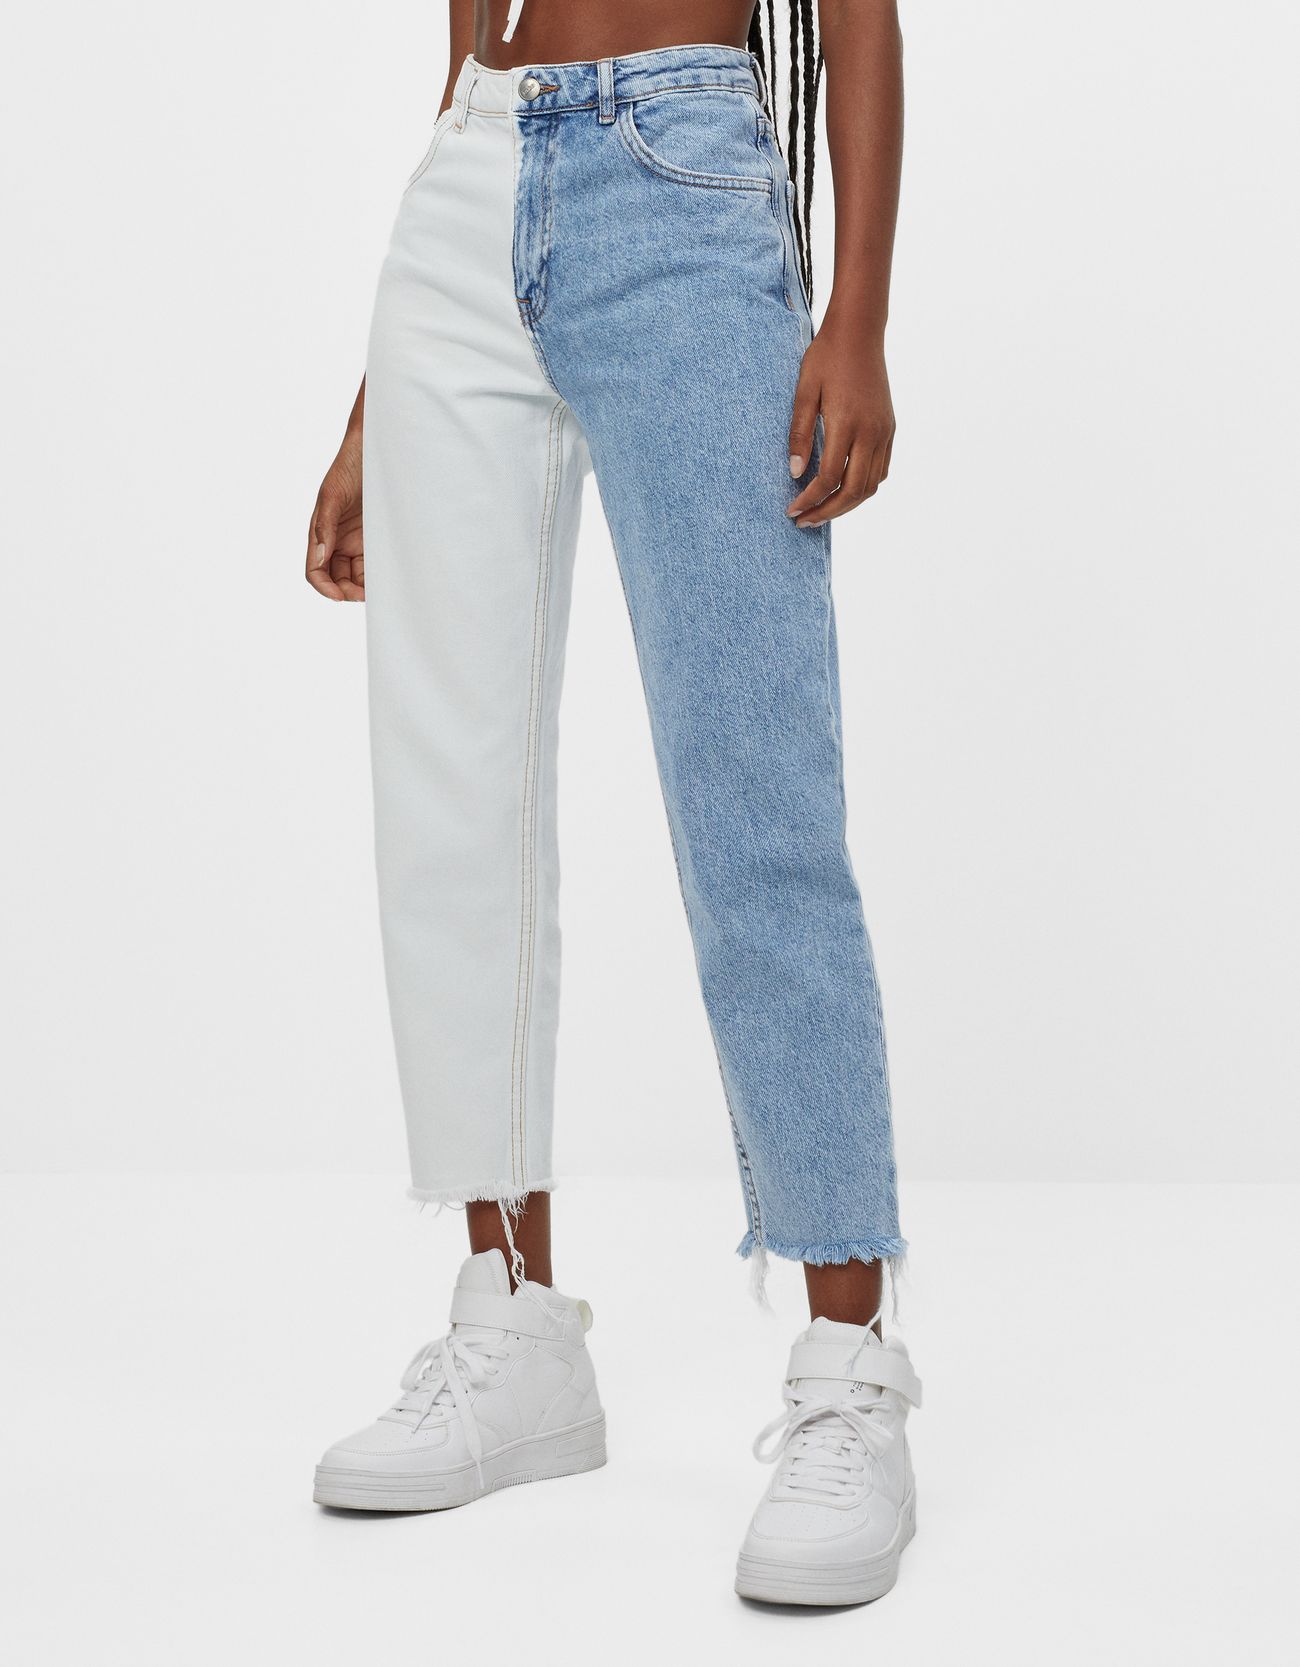 ball that's all look for Bershka Jeans Discount, SAVE 55% - bvlt-abtl.be